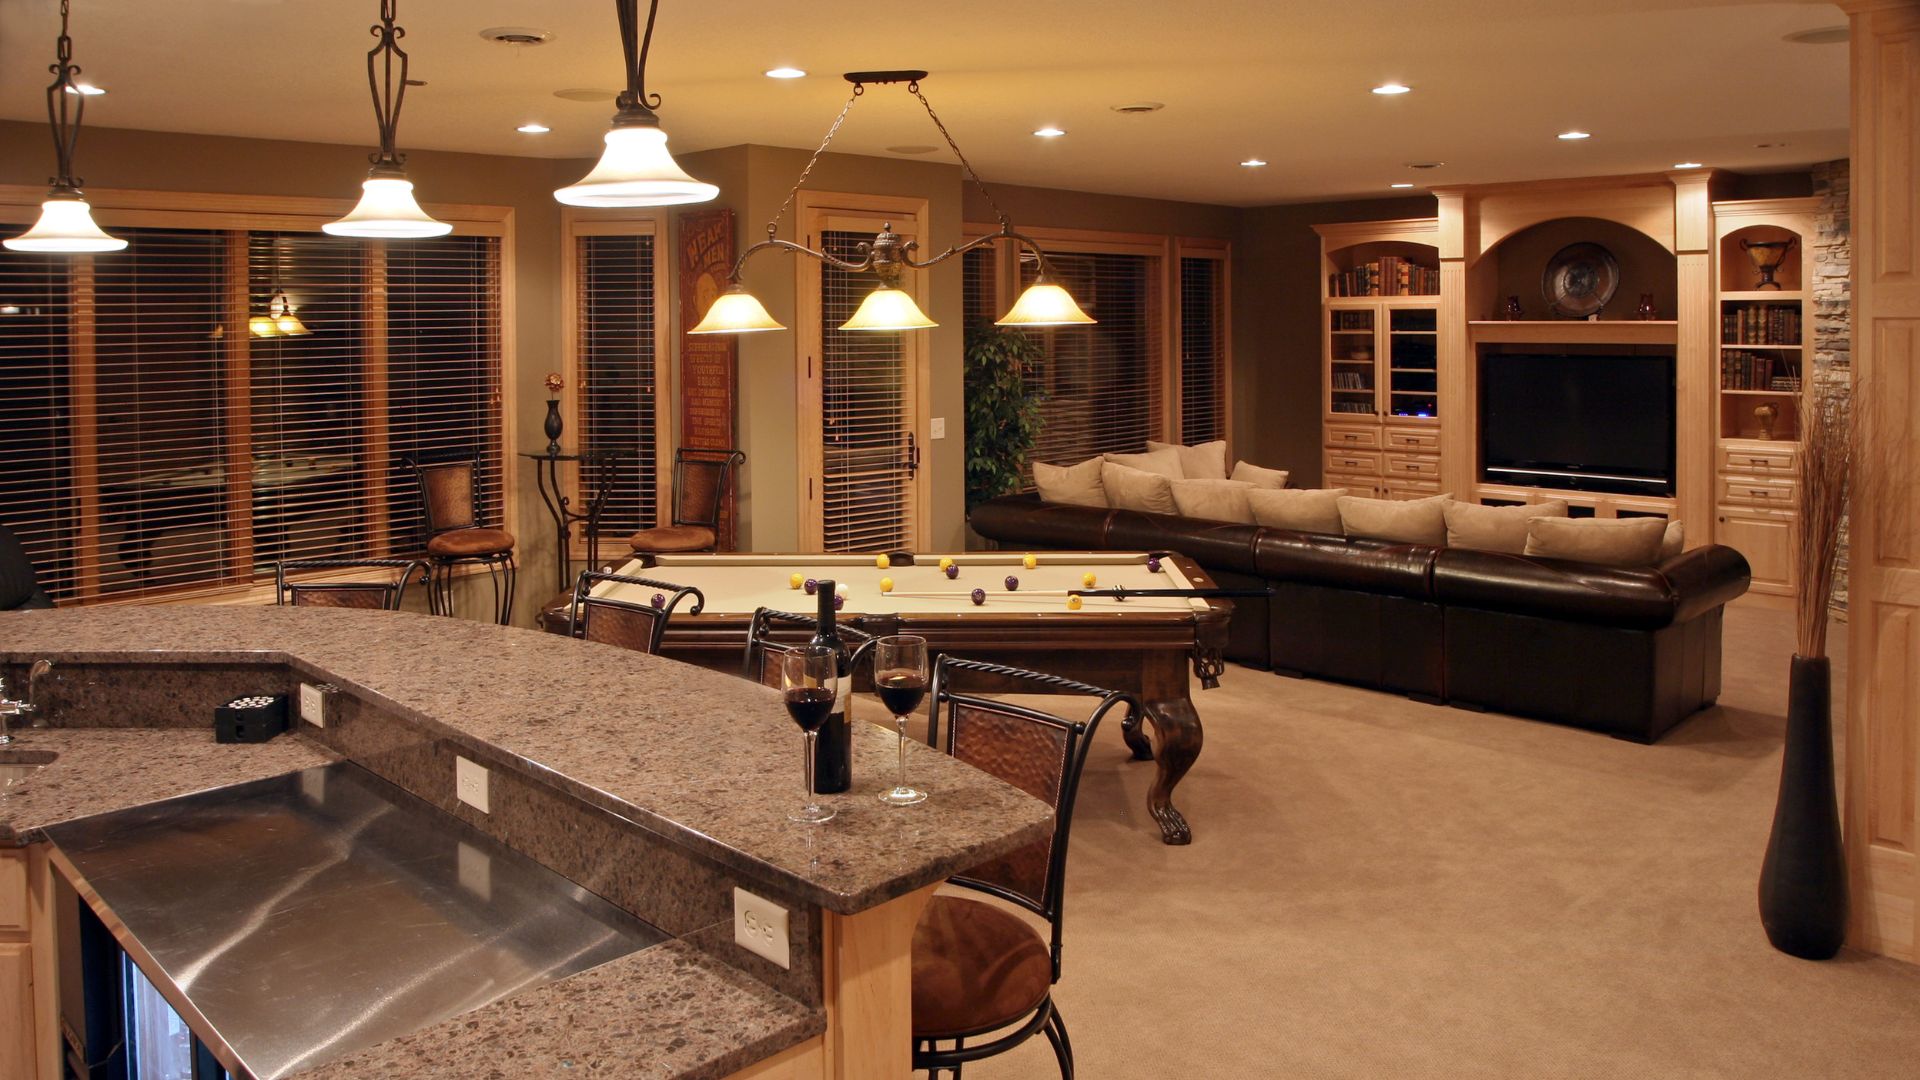 Basement Bar area in living or entertainment area